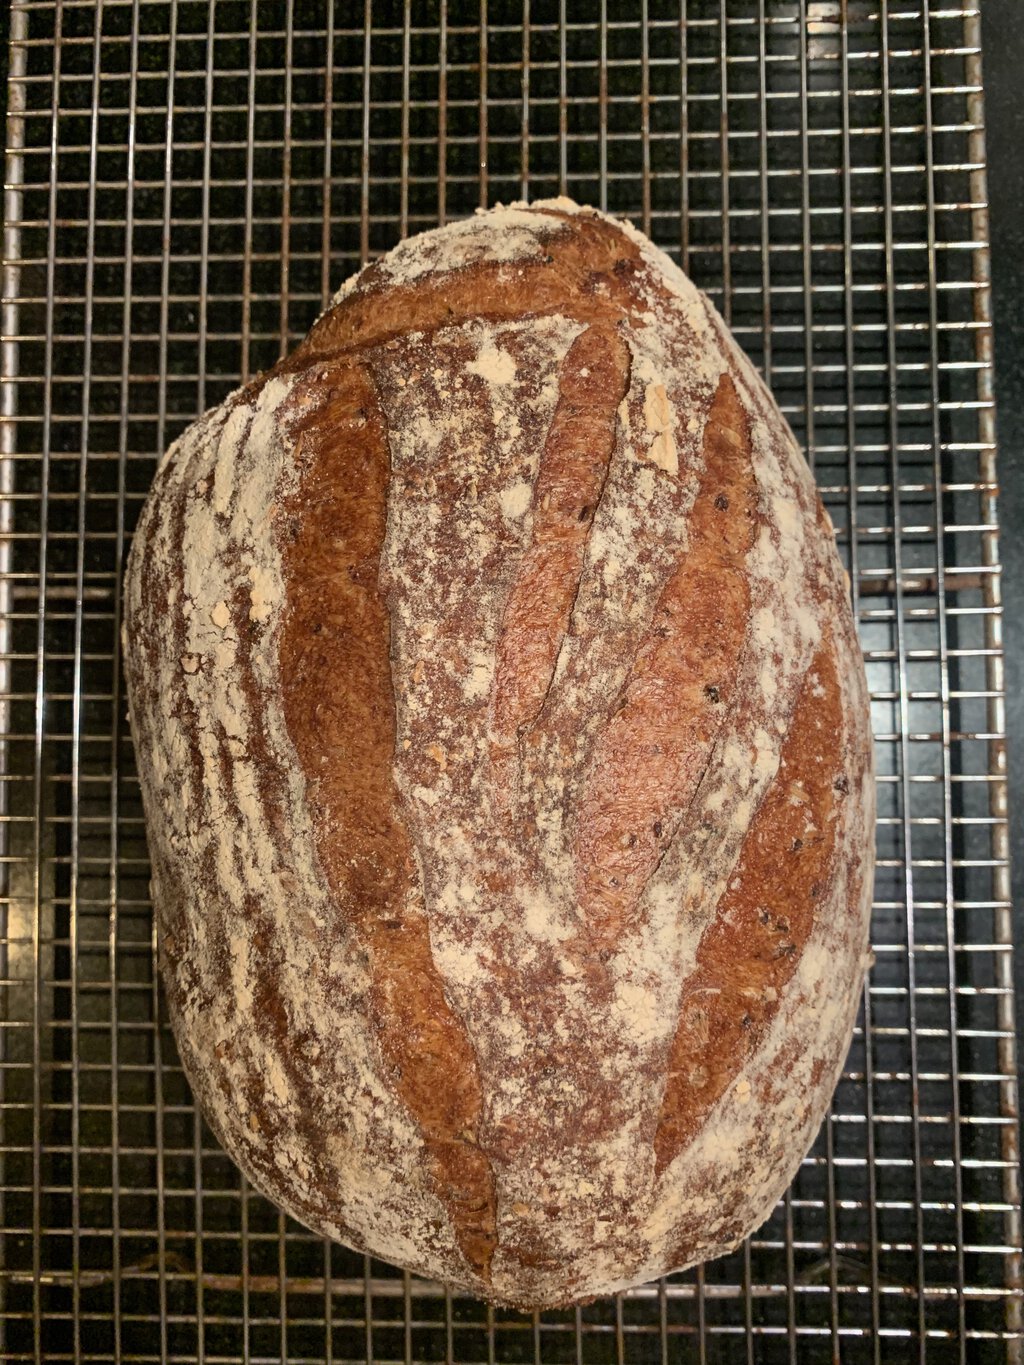 The trub and spent grain bread straight from the oven